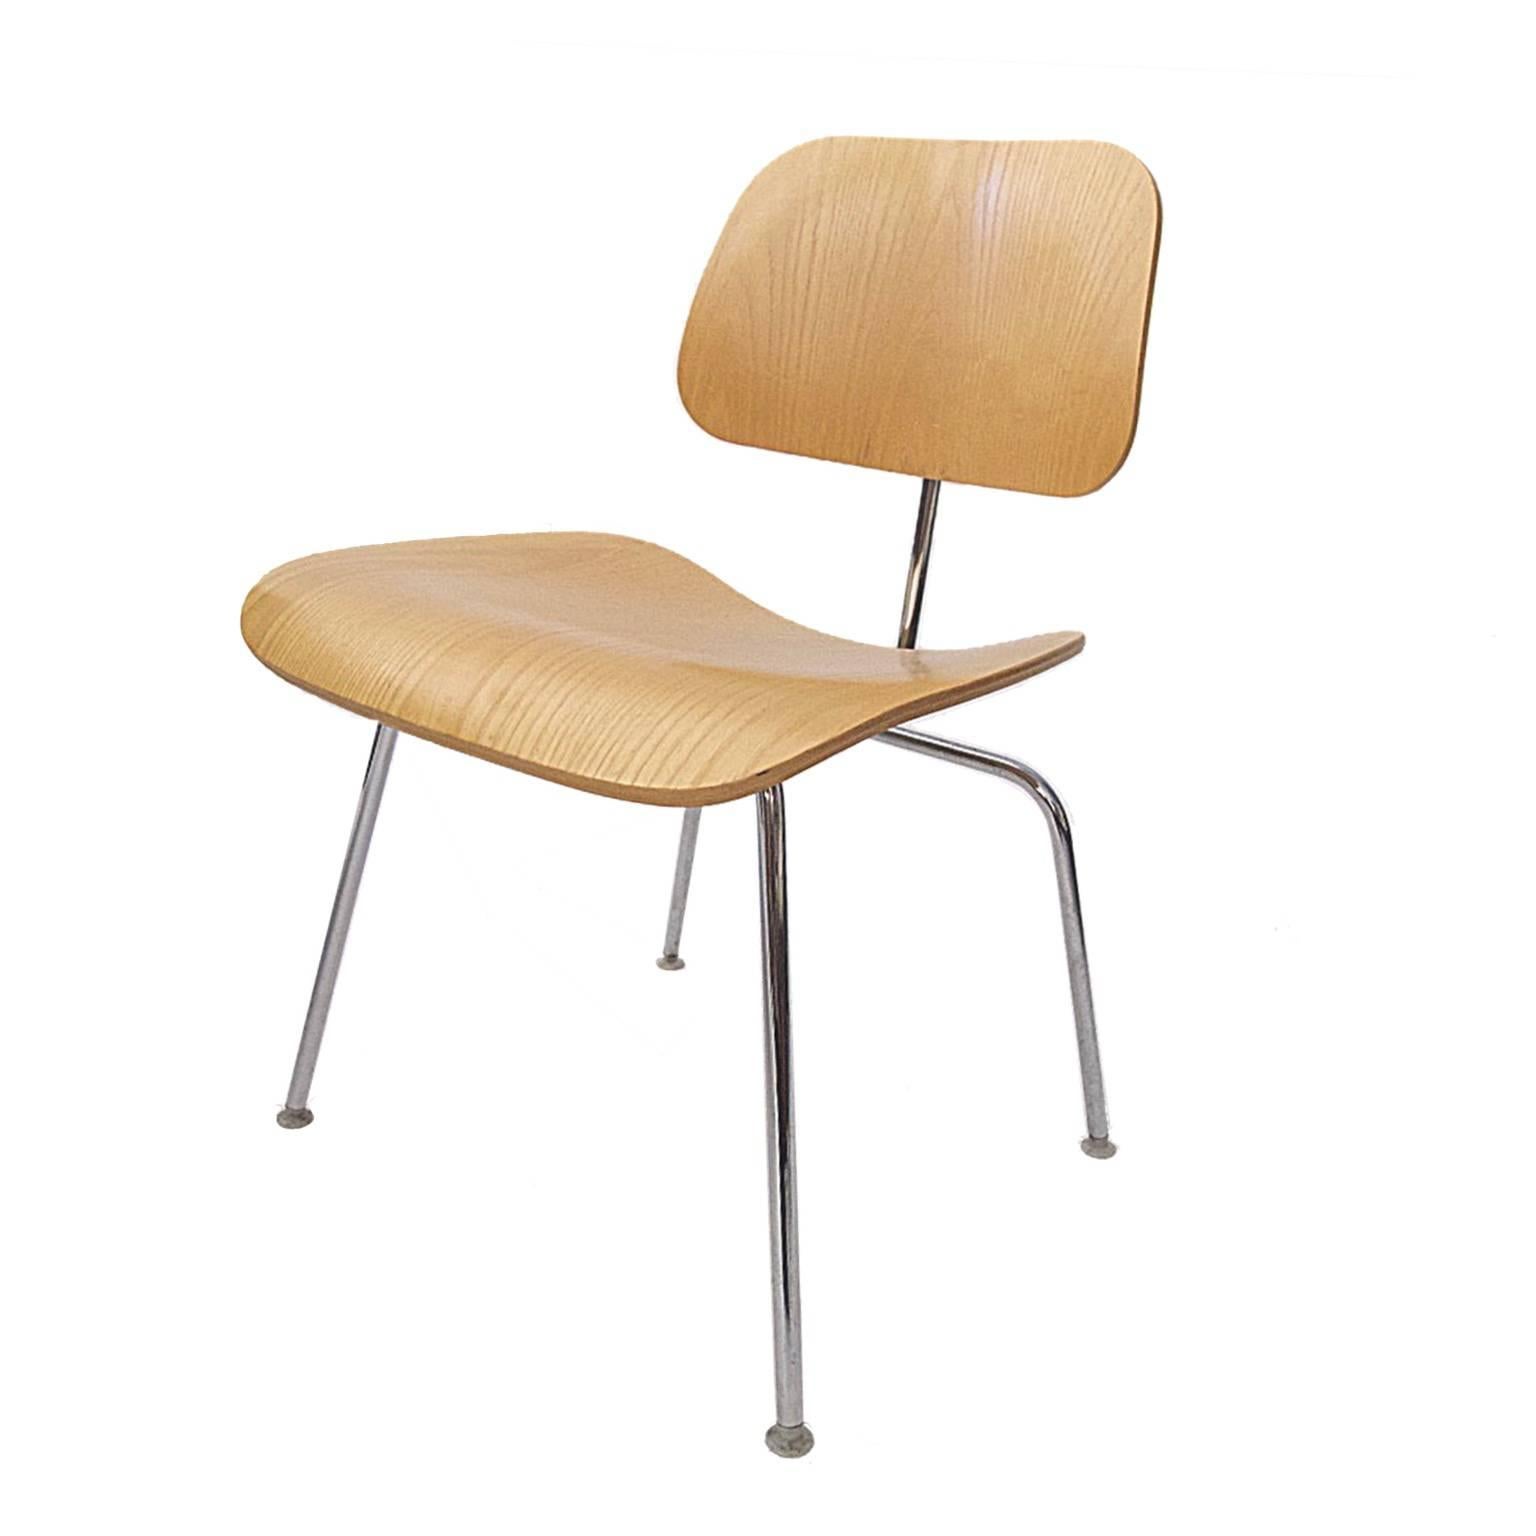 Many Charles Eames DCM Bent Plywood & Steel Chairs for Herman Miller White Ash (amerikanisch)